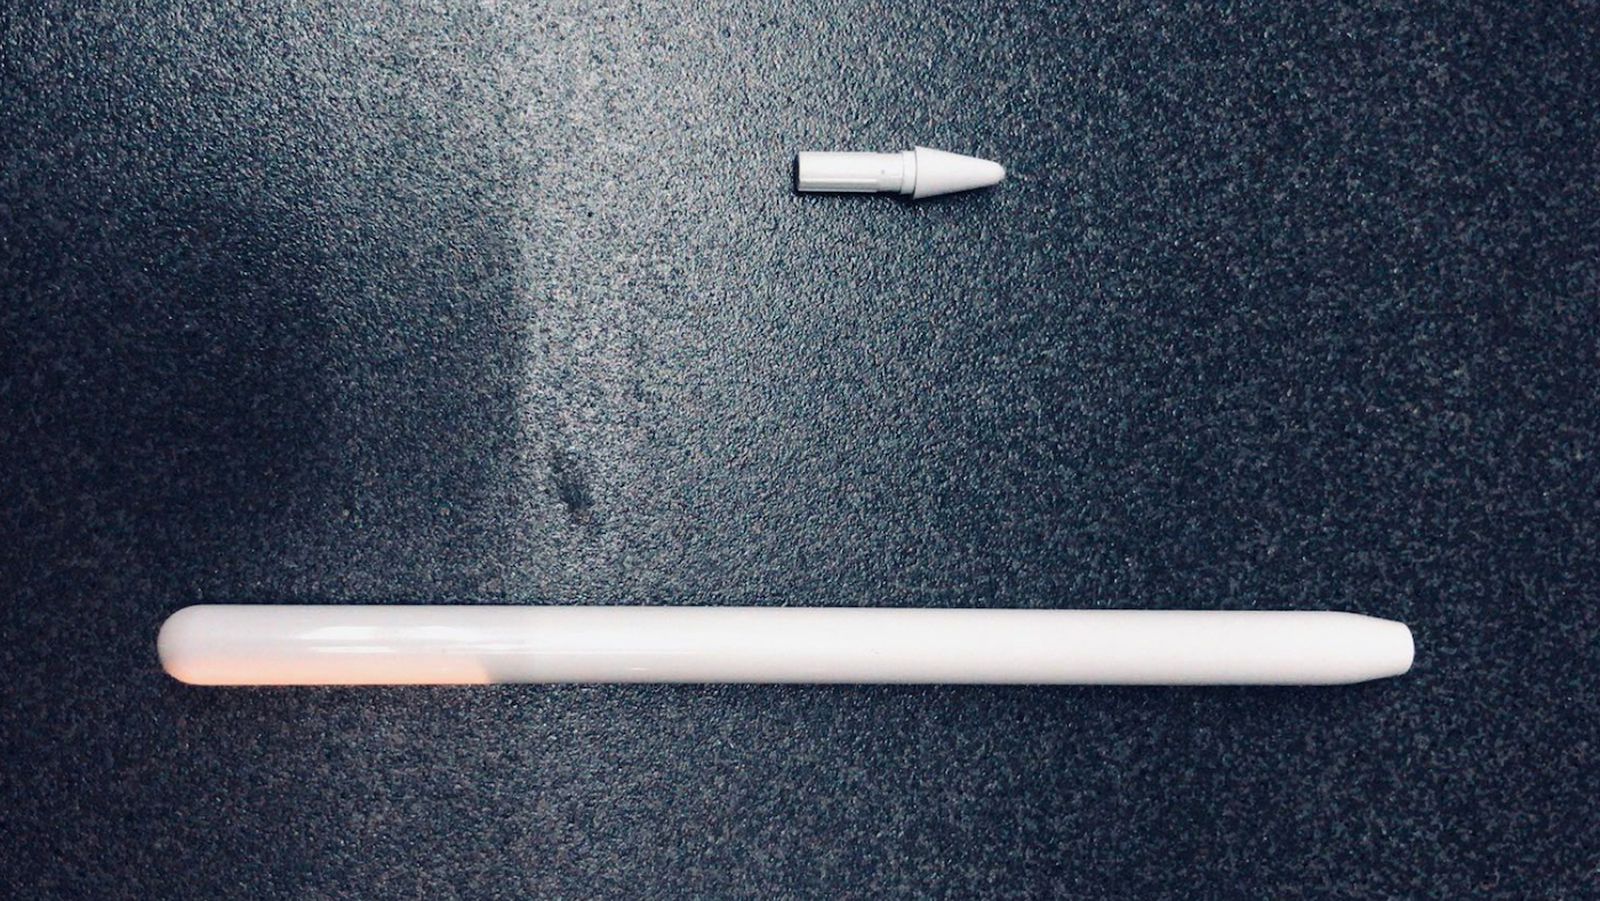 New Apple Pencil Allegedly Leaks With Glossy Finish and Redesigned Tip - MacRumors